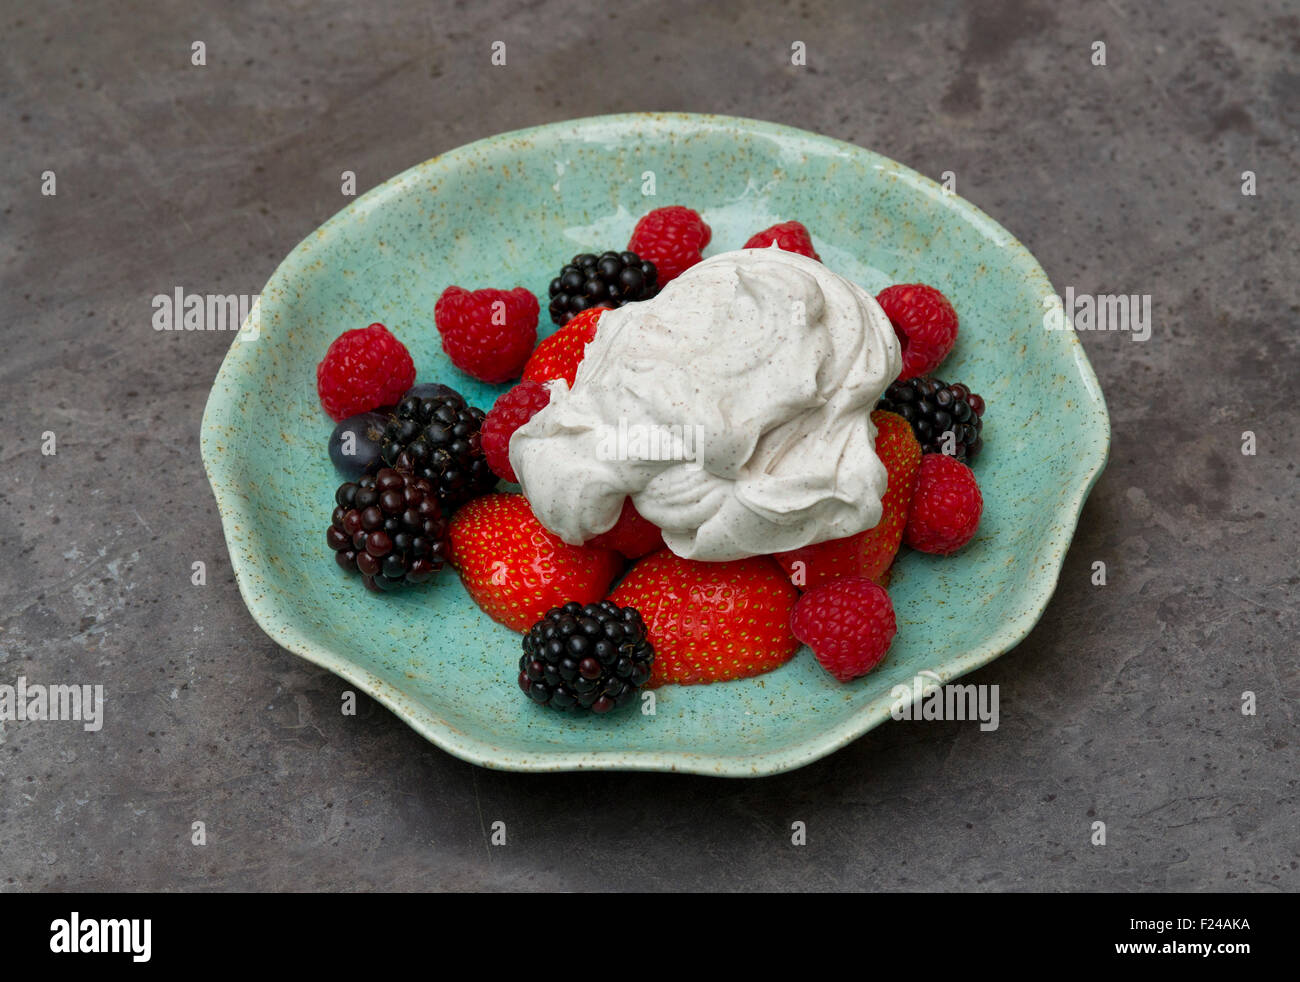 Paleo diet food, paleo cream with a selection of fruit berries, supposed based on 'cave man' Palaeolithic food. a UK dessert Stock Photo